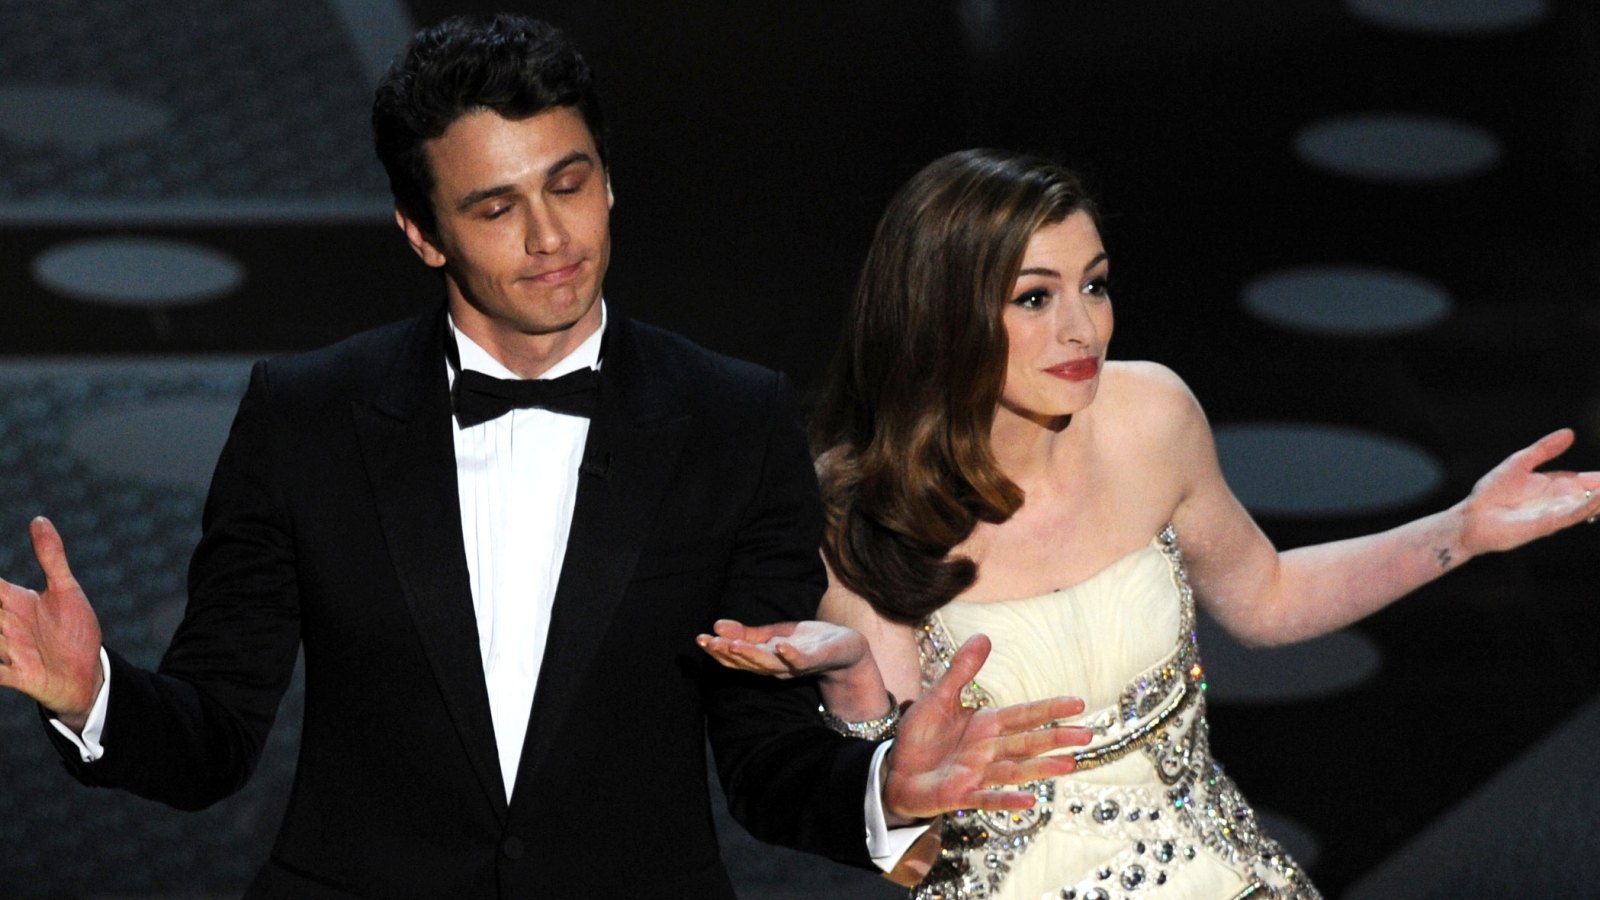 Anne Hathaway Jokes About Hosting Oscars With James Franco